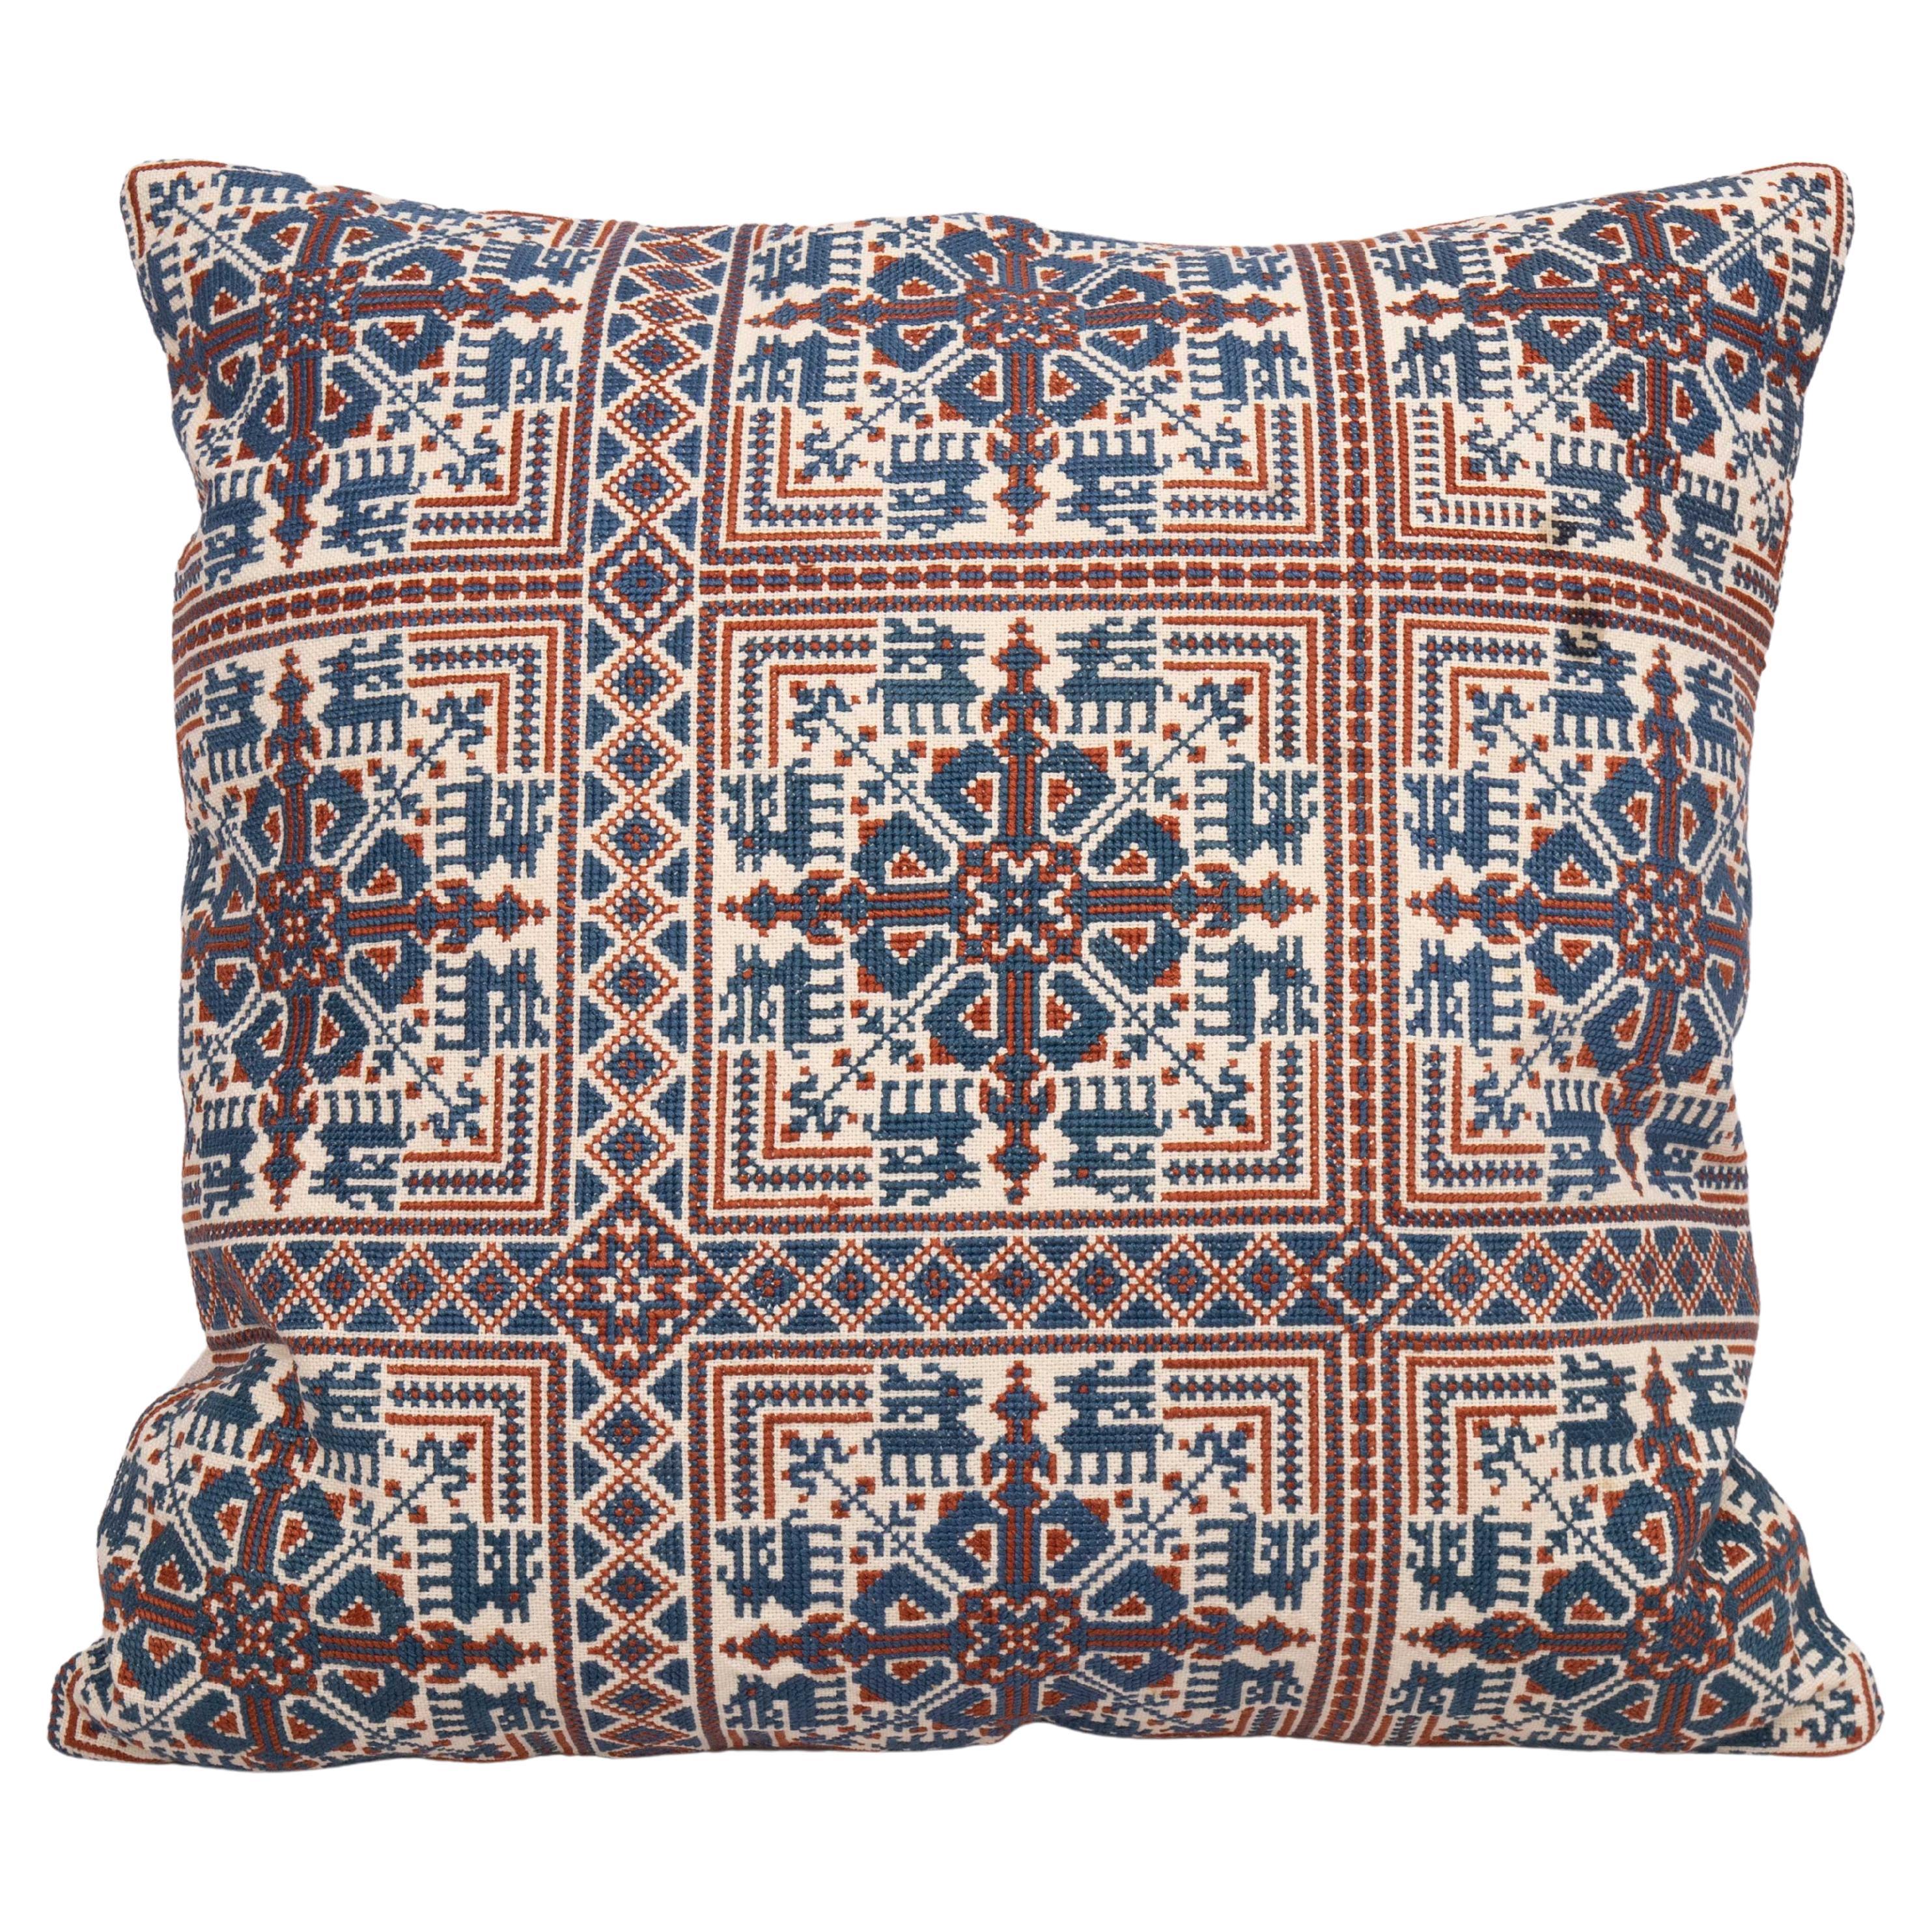 Pillowcase Made from an Antique Eastern European Embroidered Panel For Sale